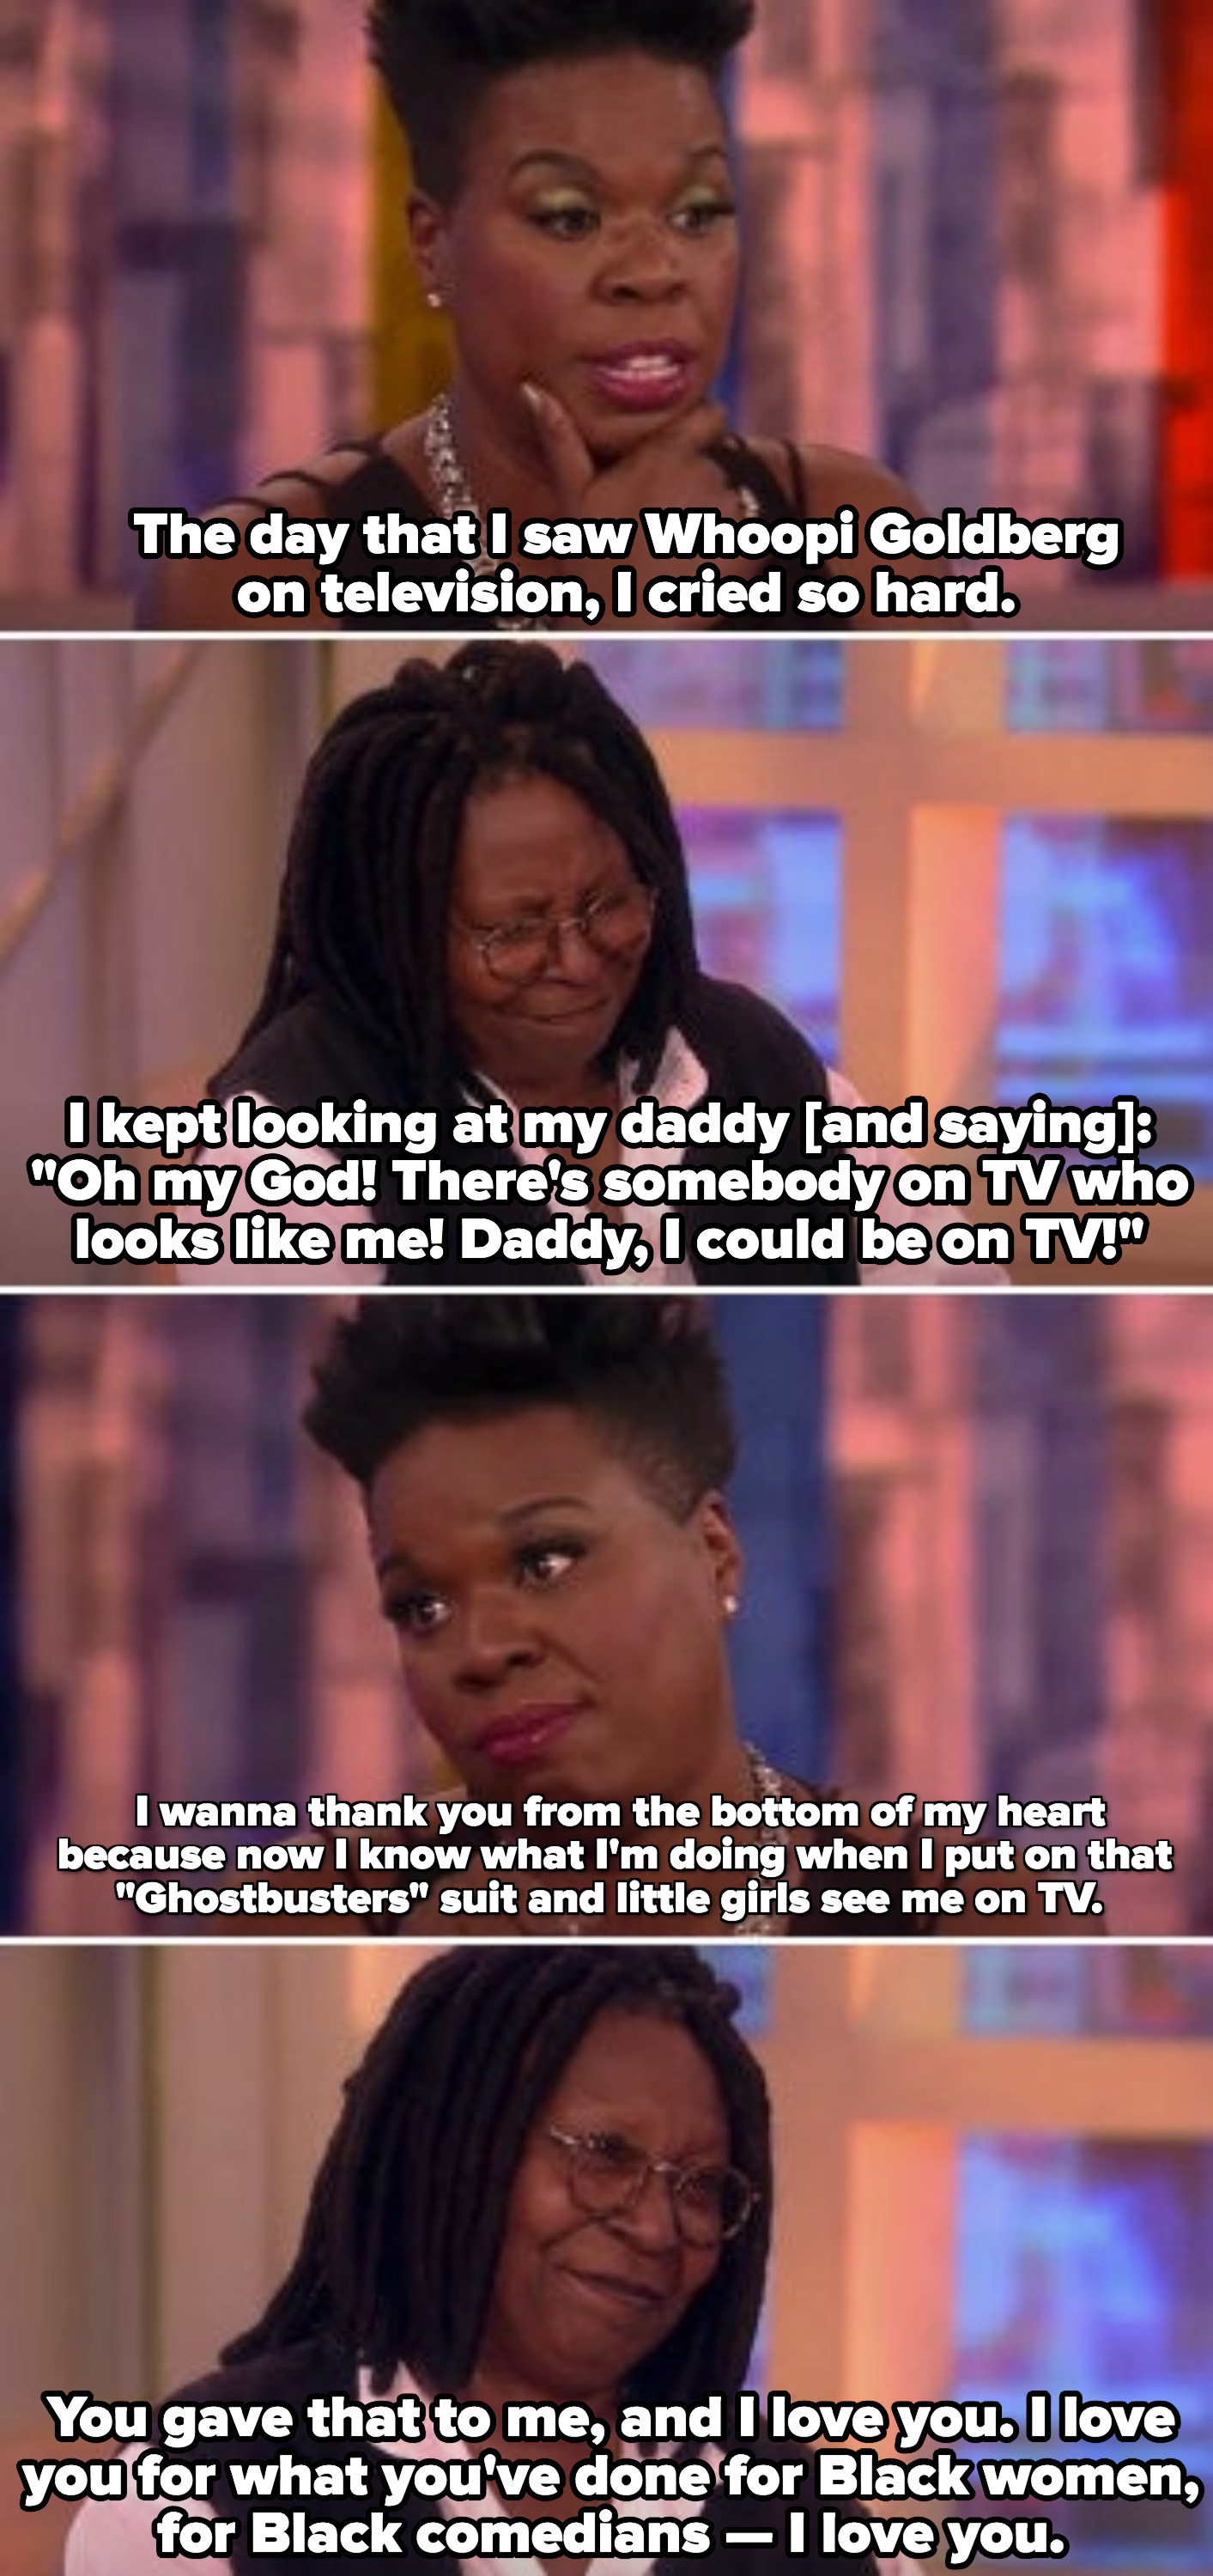 Leslie Jones telling Whoopi: &quot;I wanna thank you from the bottom of my heart because now I know what I&#x27;m doing when I put on that &#x27;Ghostbusters&#x27; suit and little girls see me on TV&quot;